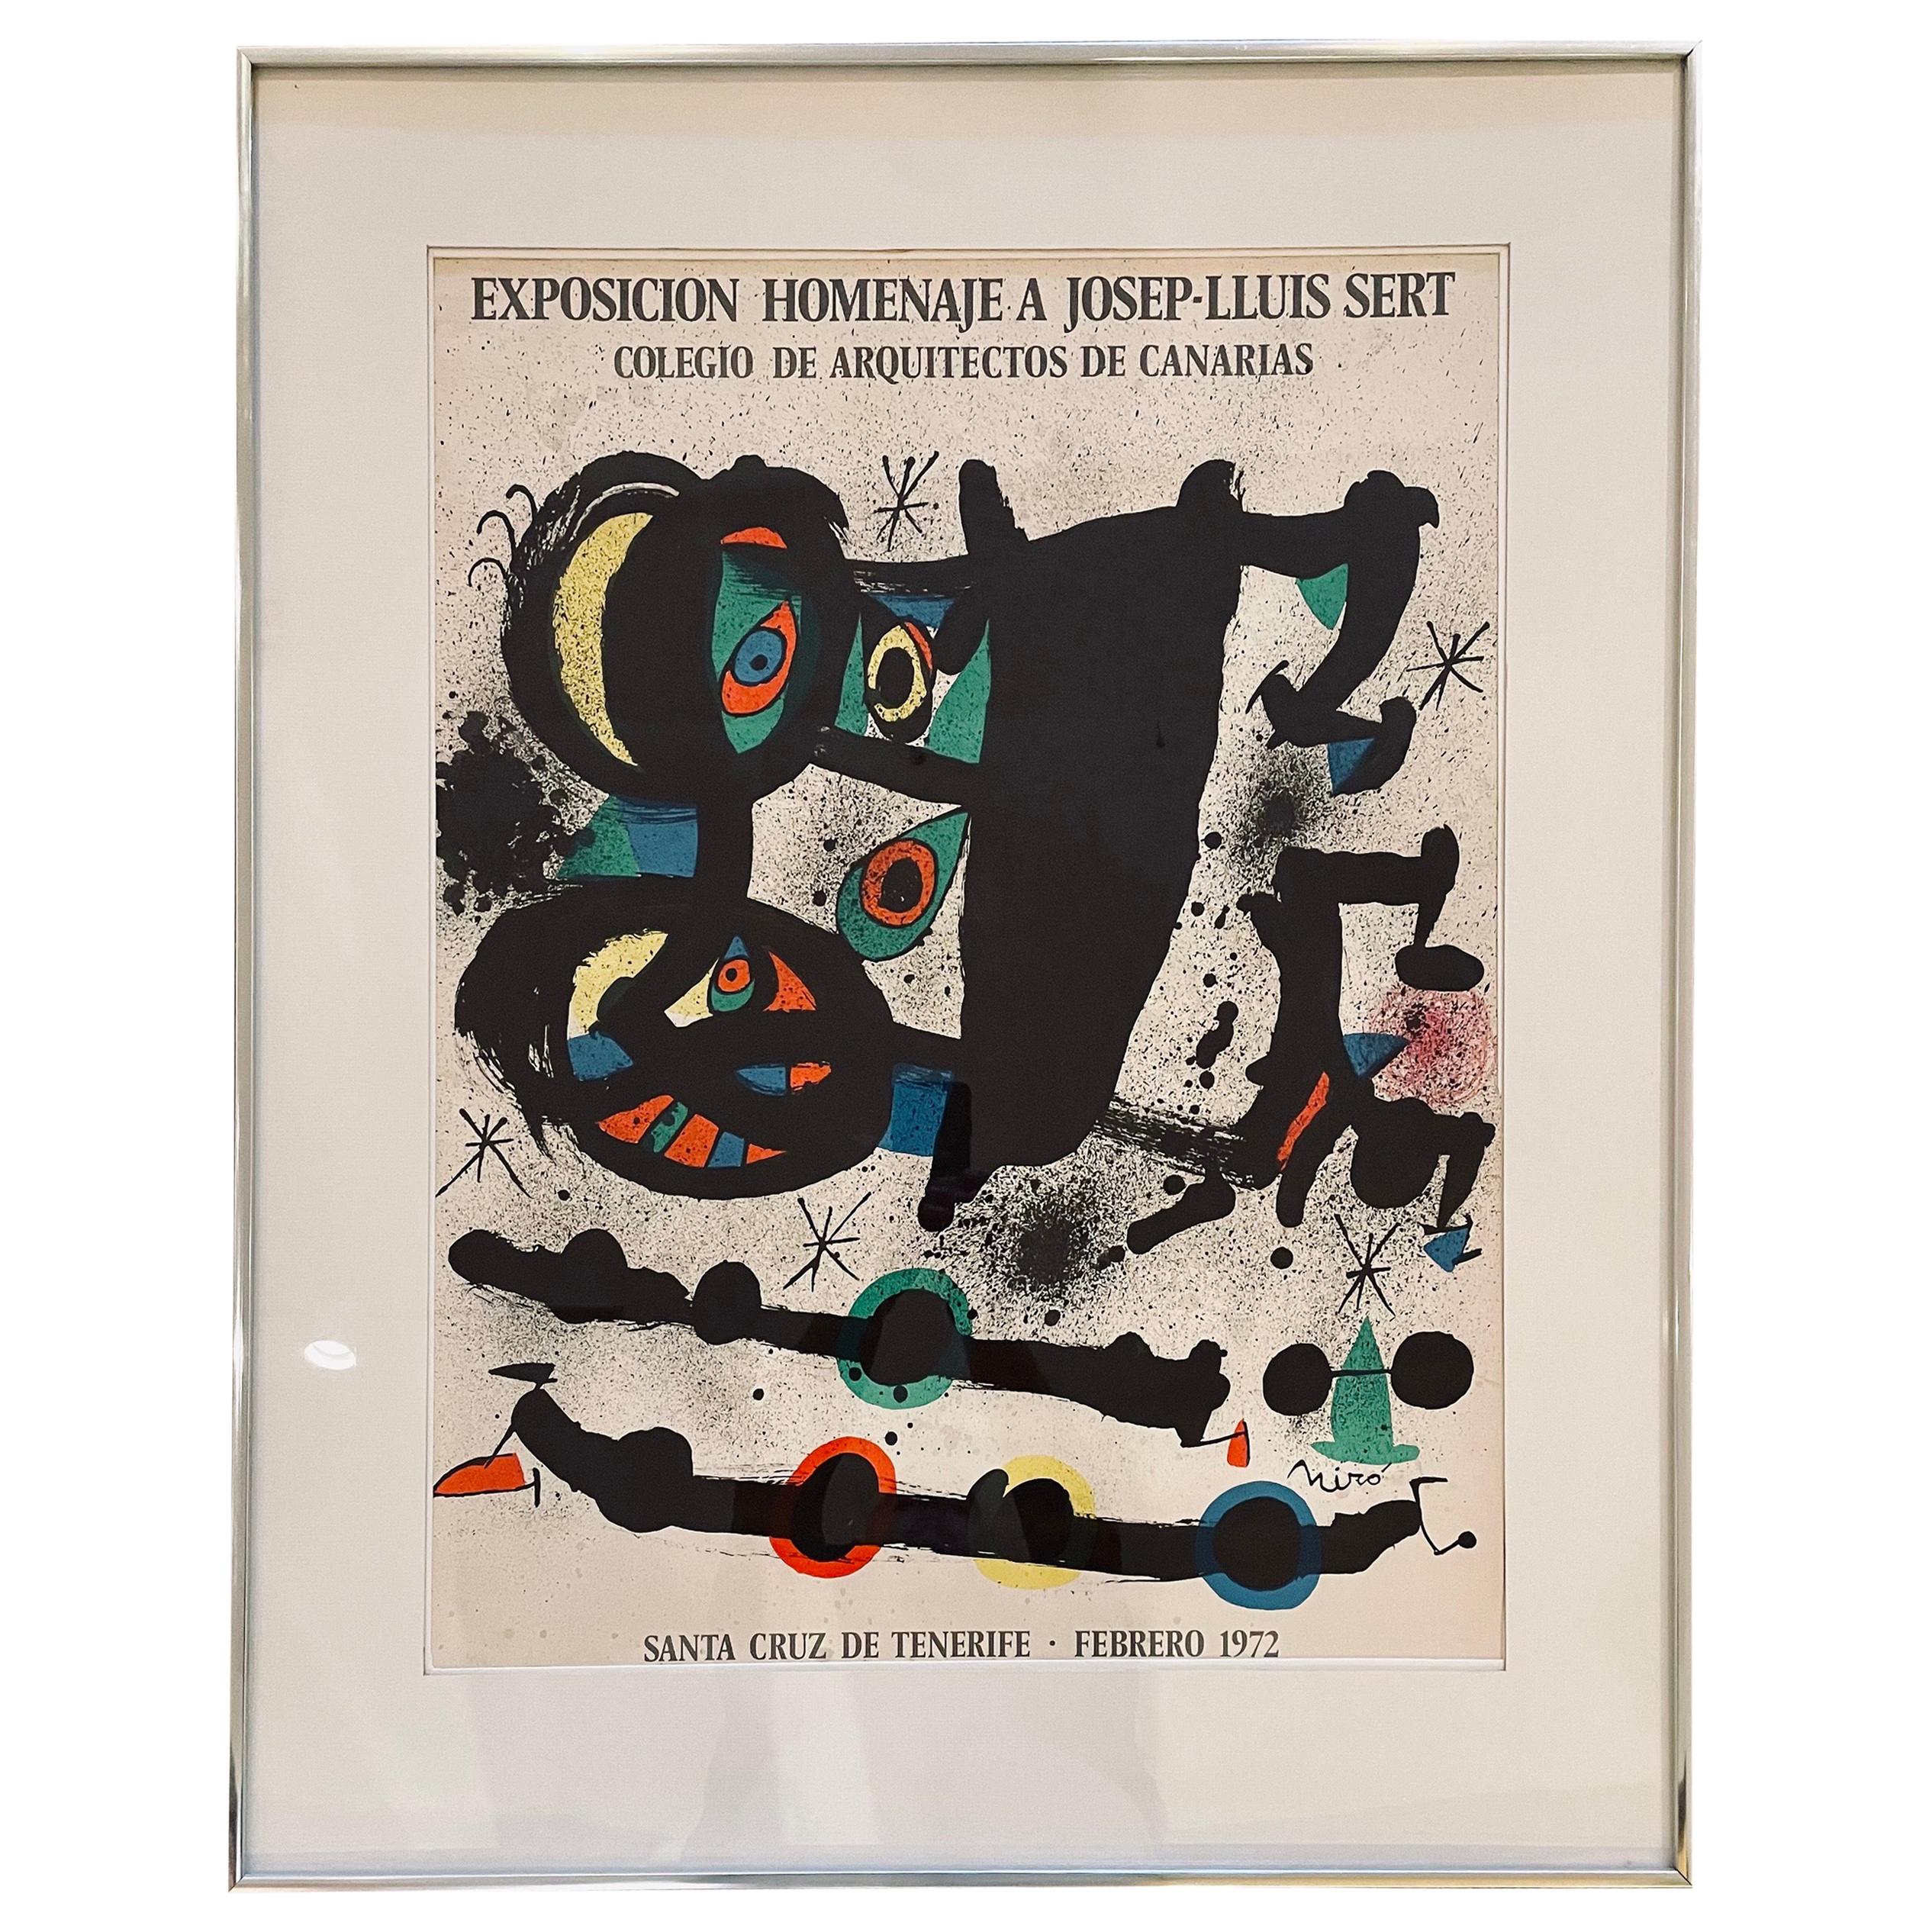 Rare 1972 Joan Miro Original Abstract Exposition Poster from Canarias Spain